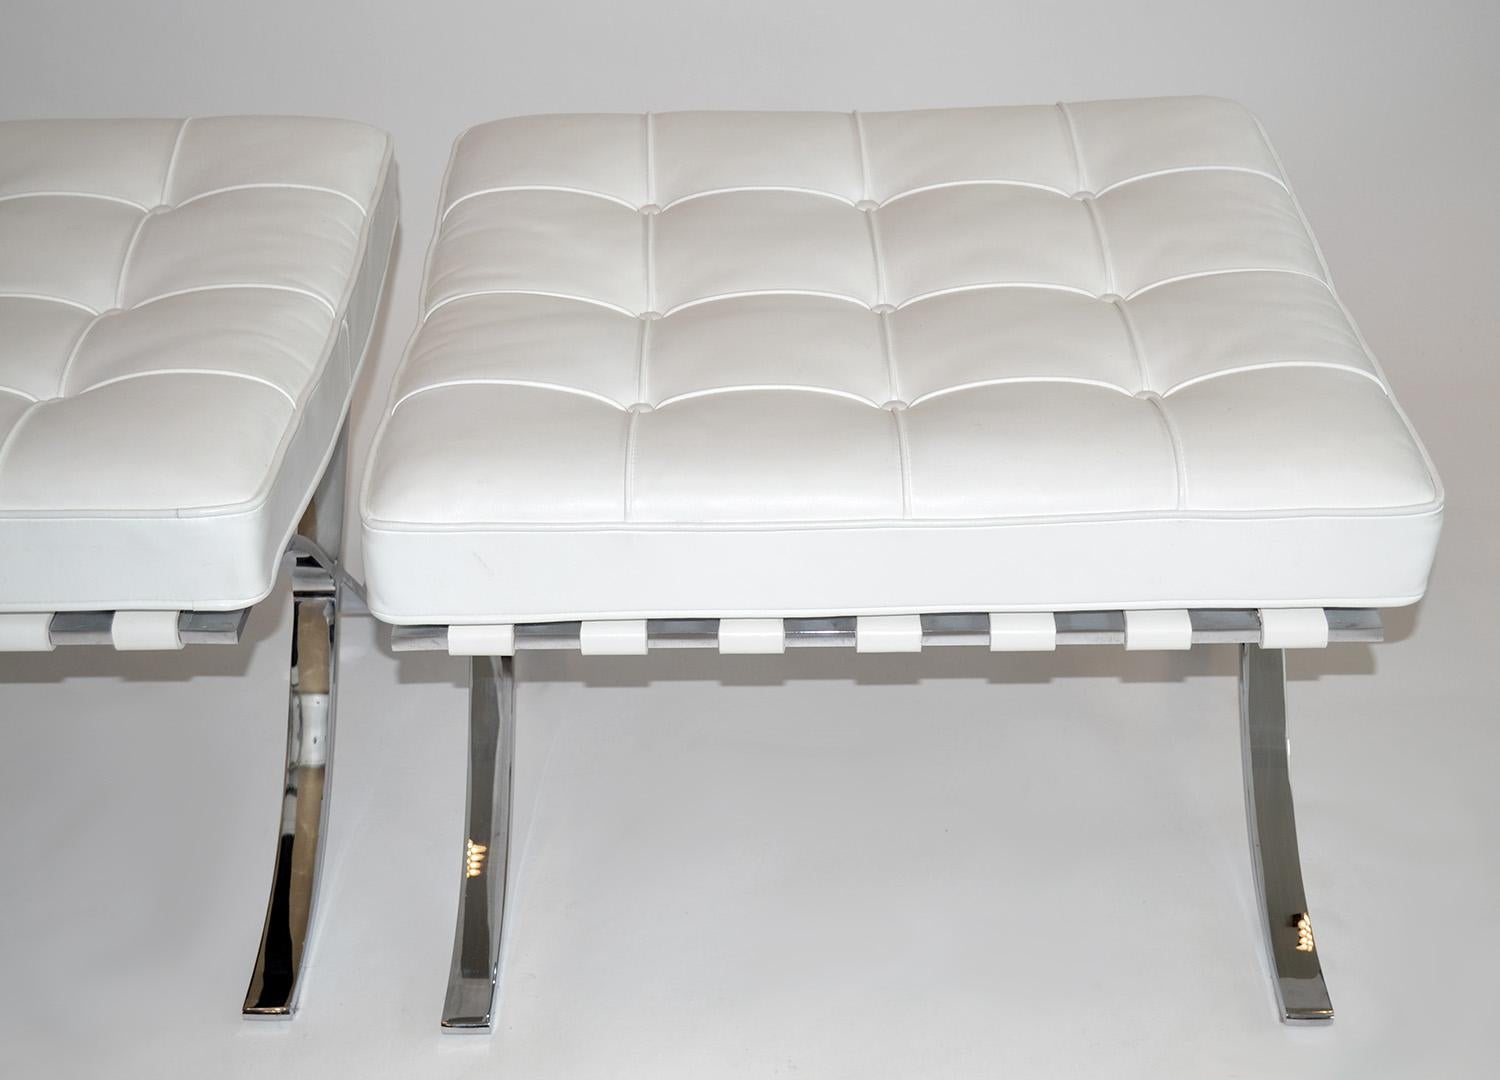 Pair of Knoll Barcelona stools ottomans in White Sabrina Leather, circa 2000s. Pair of Knoll Barcelona stools or ottomans in white Sabrina leather, circa 2000s Ludwig Mies van der Rohe 1929 excellent condition.

Whether paired with Barcelona chair